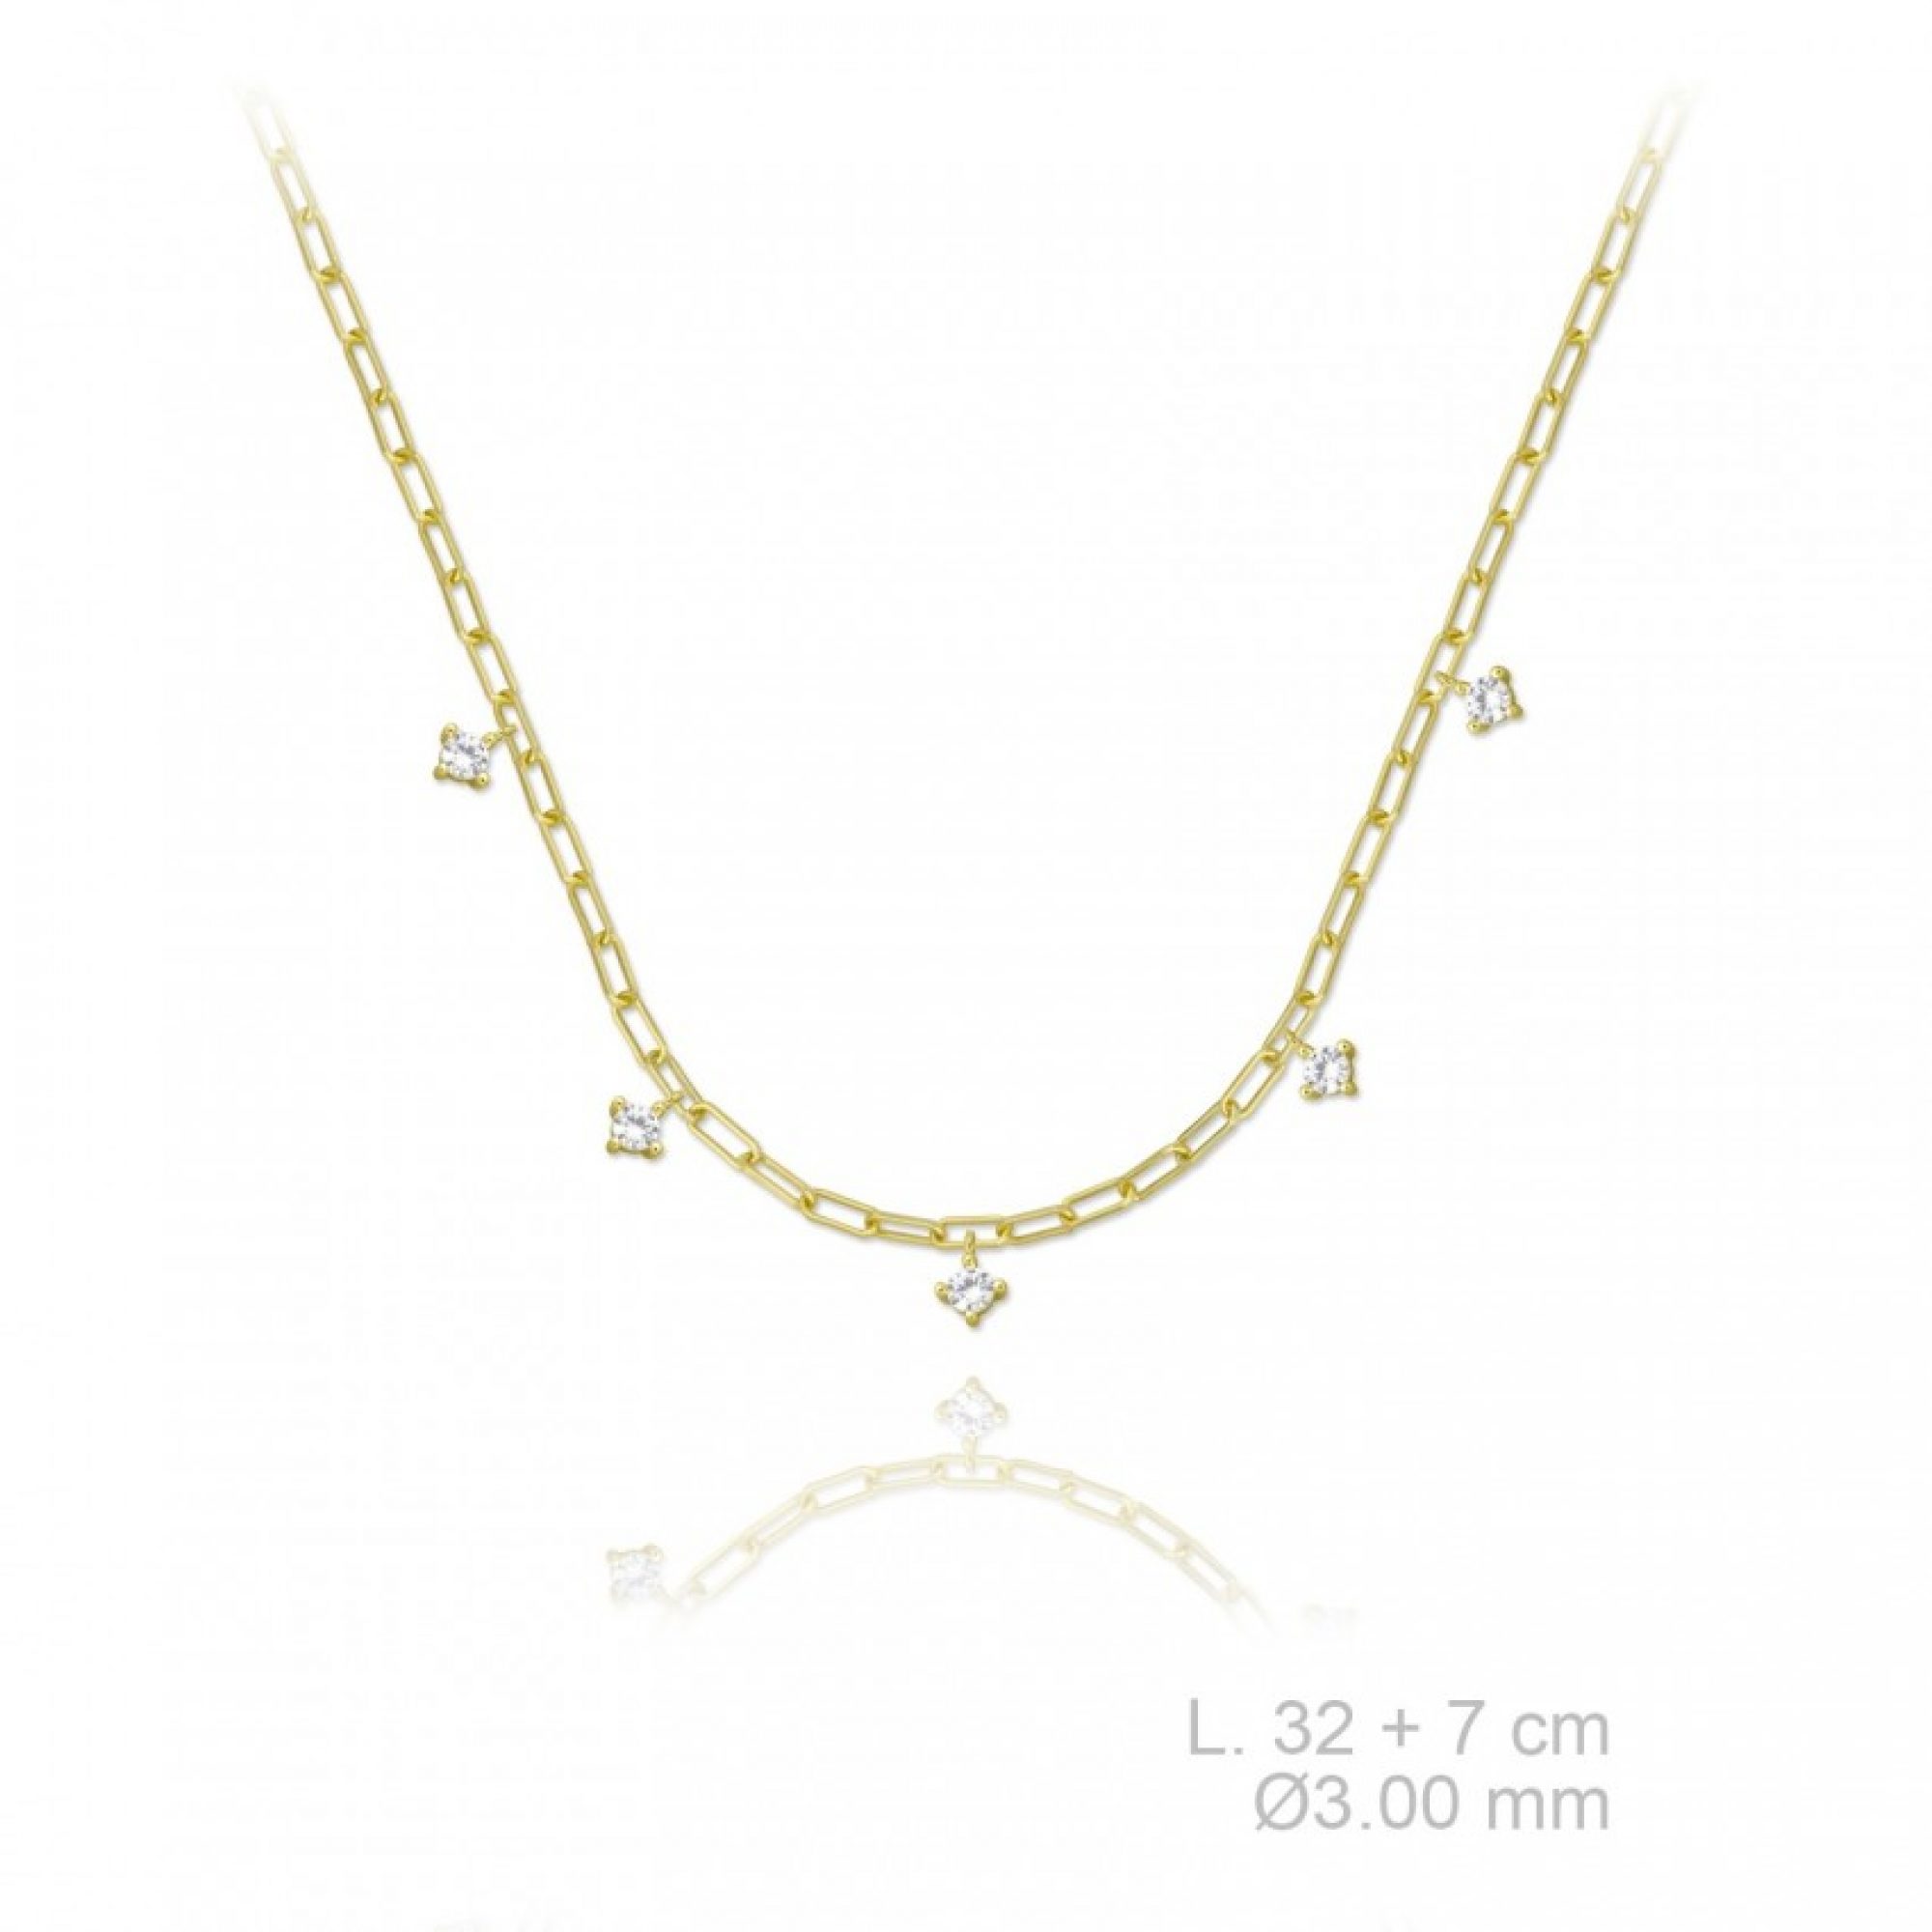 Gold plated necklace with zircon stones